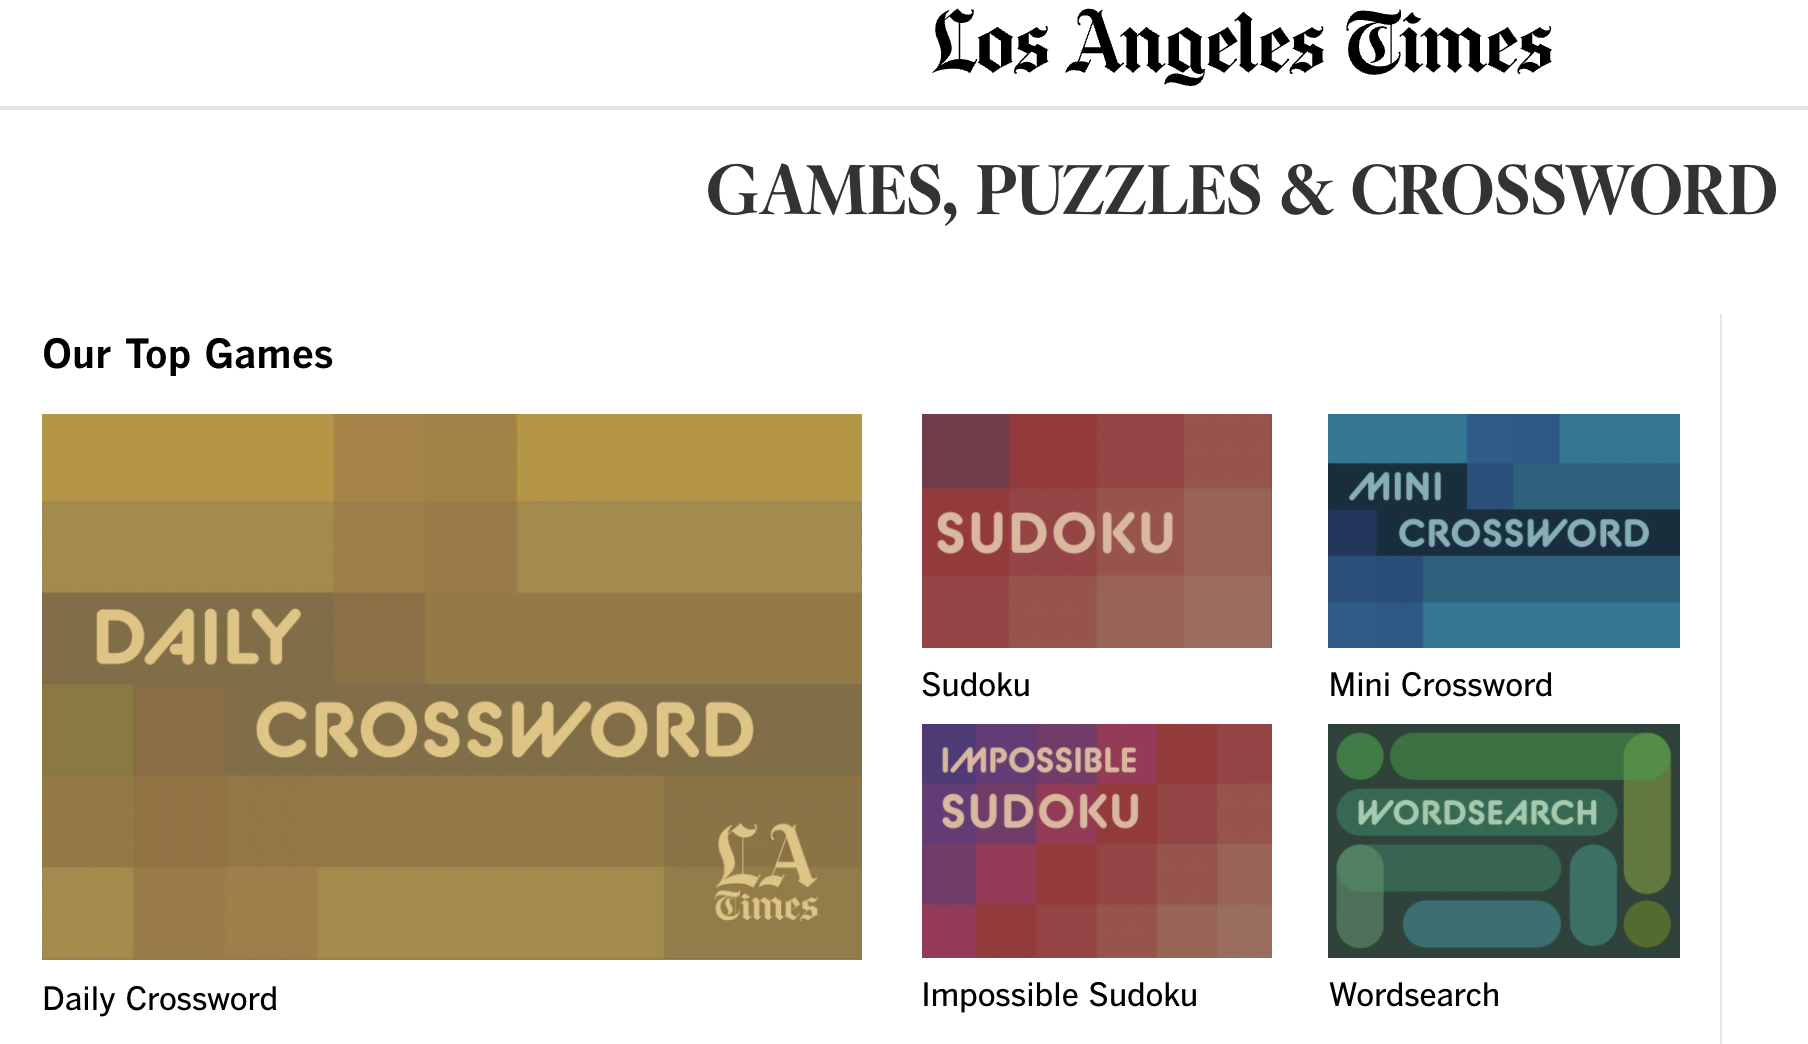 LA Times games page for crosswords, sudoku and word search